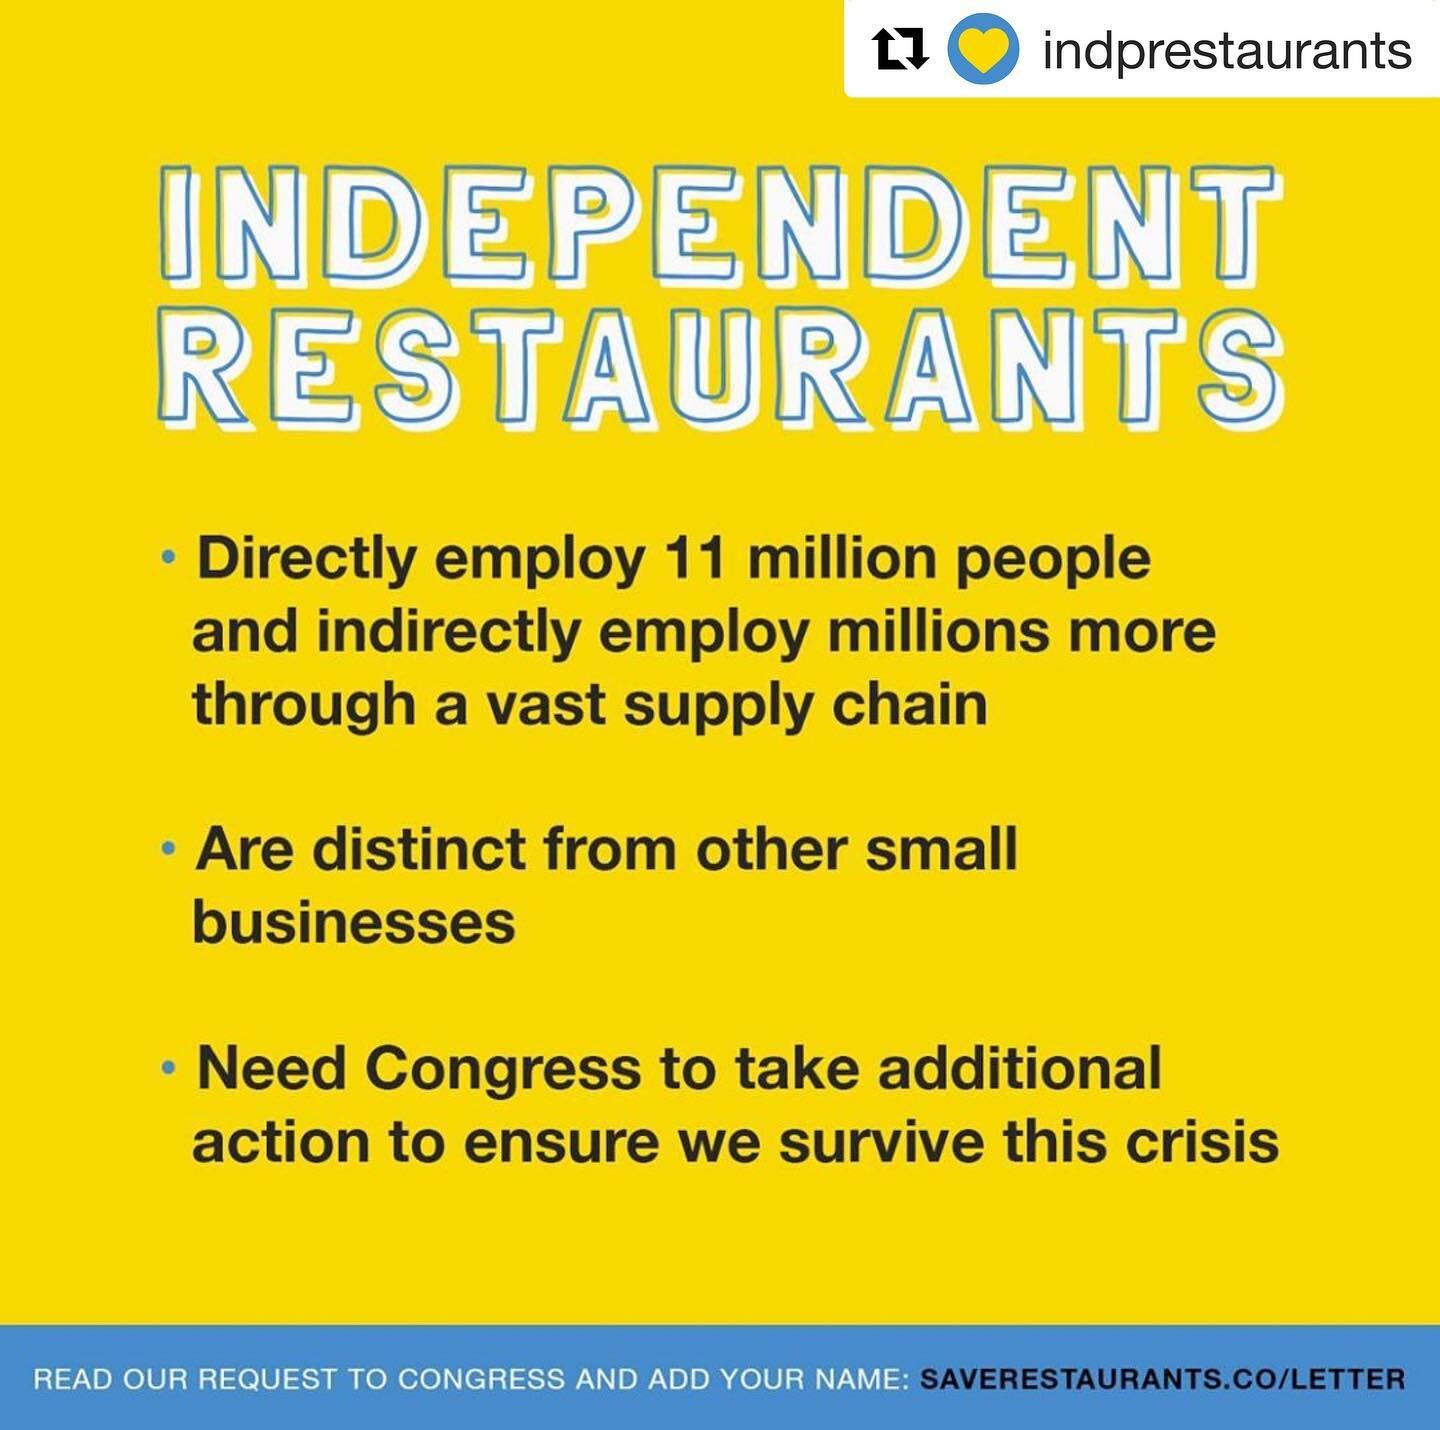 THIS. Please please please add your name. I am digesting options available to us small independent restauranteurs daily. While there are newer options (such as the PPP and the SBA EIDL) available, we still have an uncertain timeline as to when we can